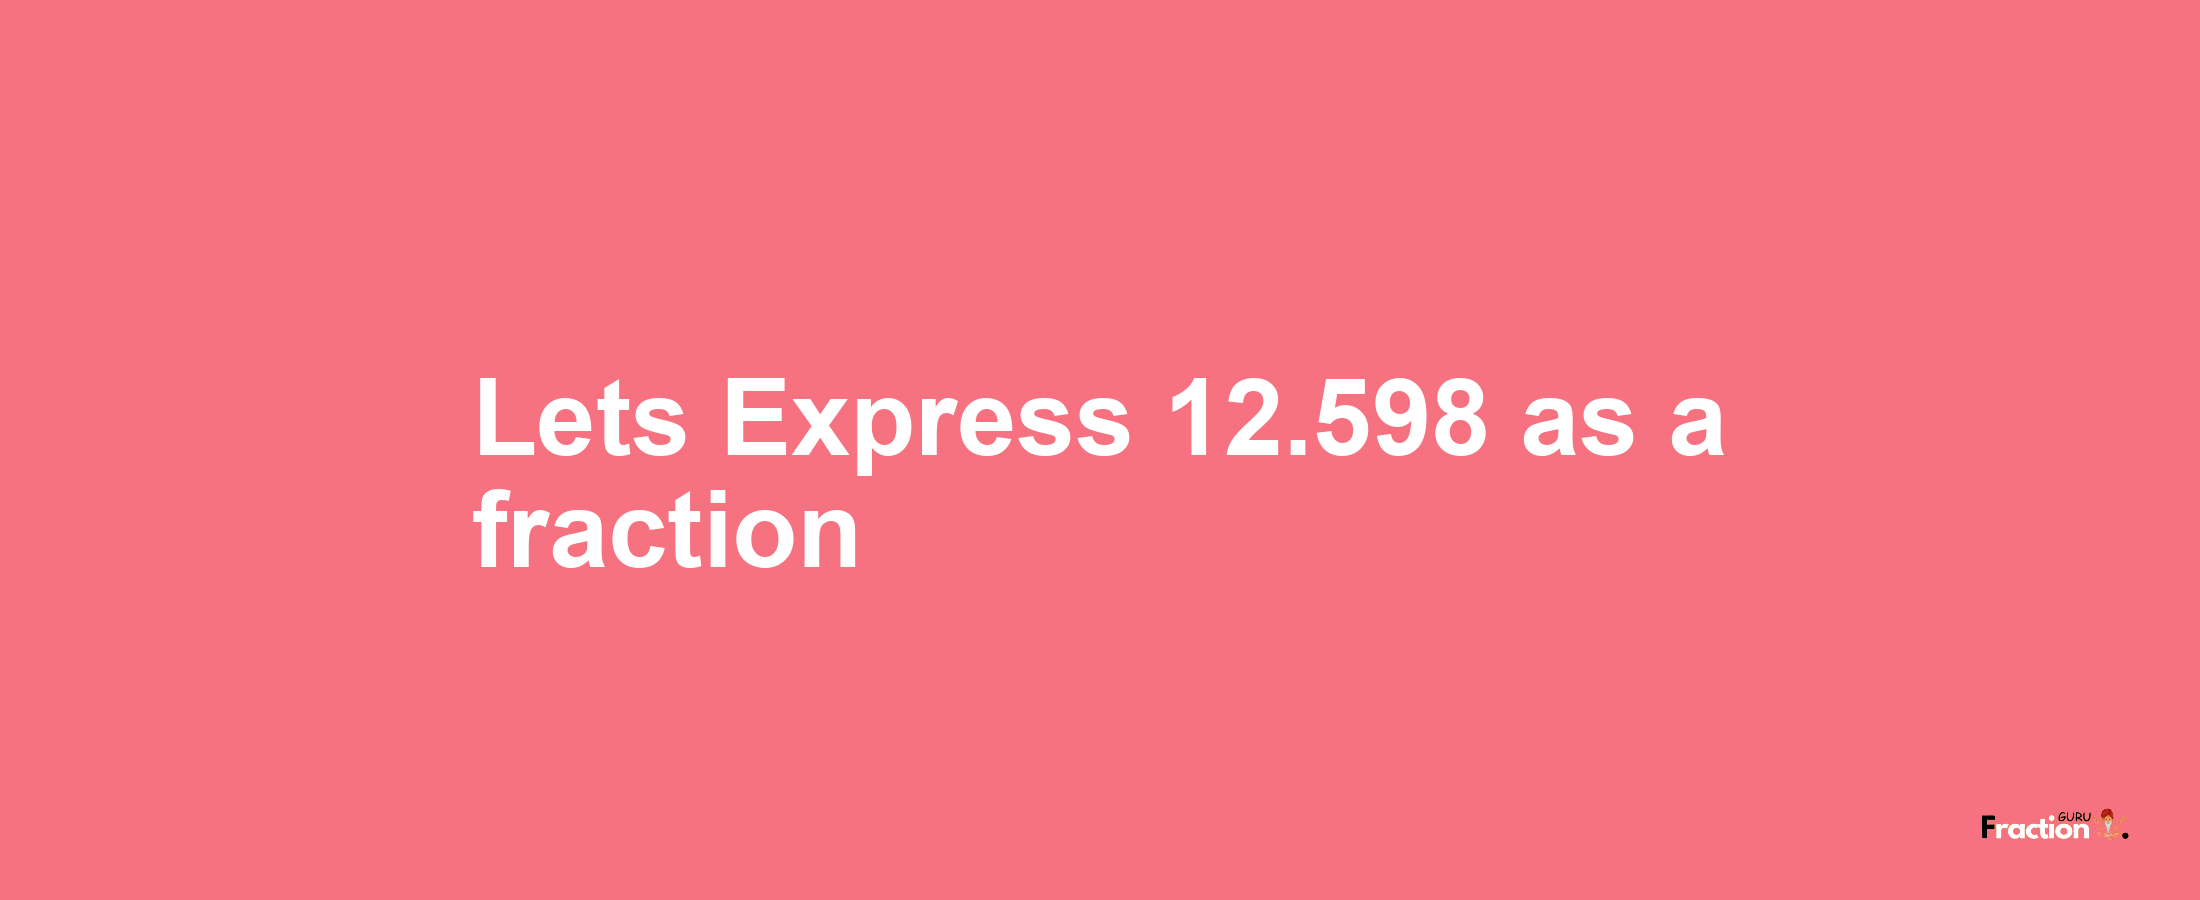 Lets Express 12.598 as afraction